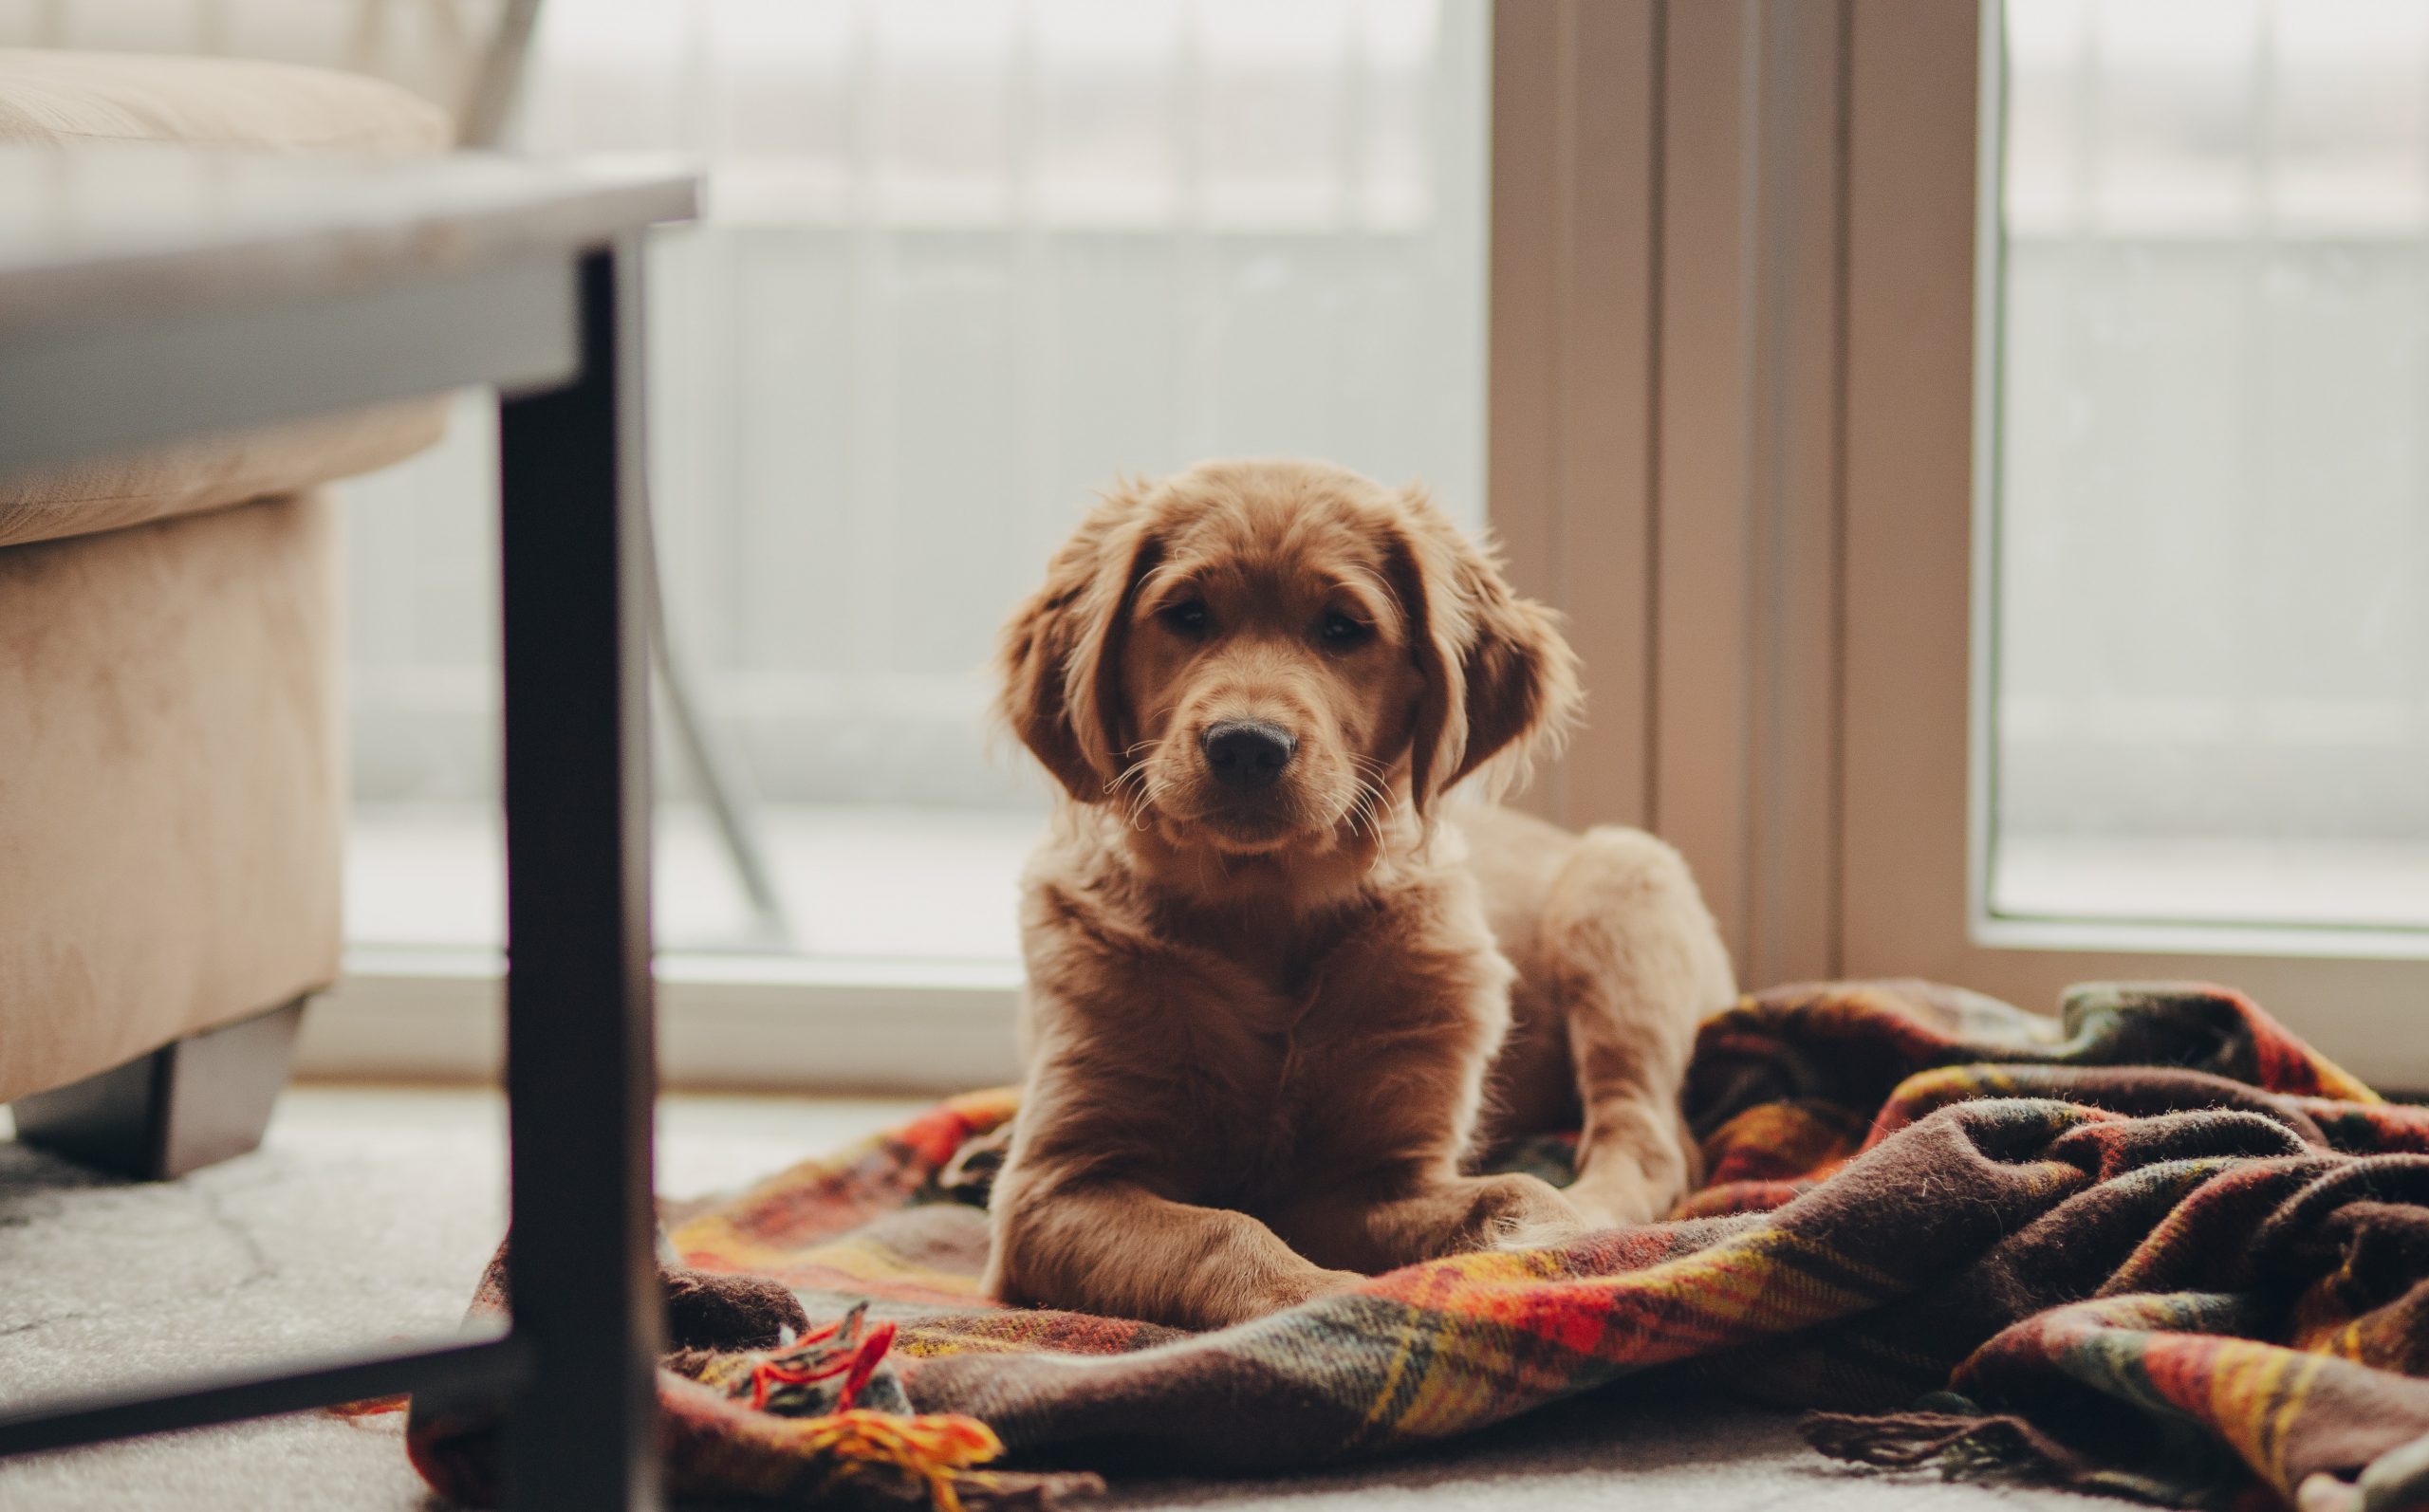 12 Tips When Looking For Apartments That Allow Dogs